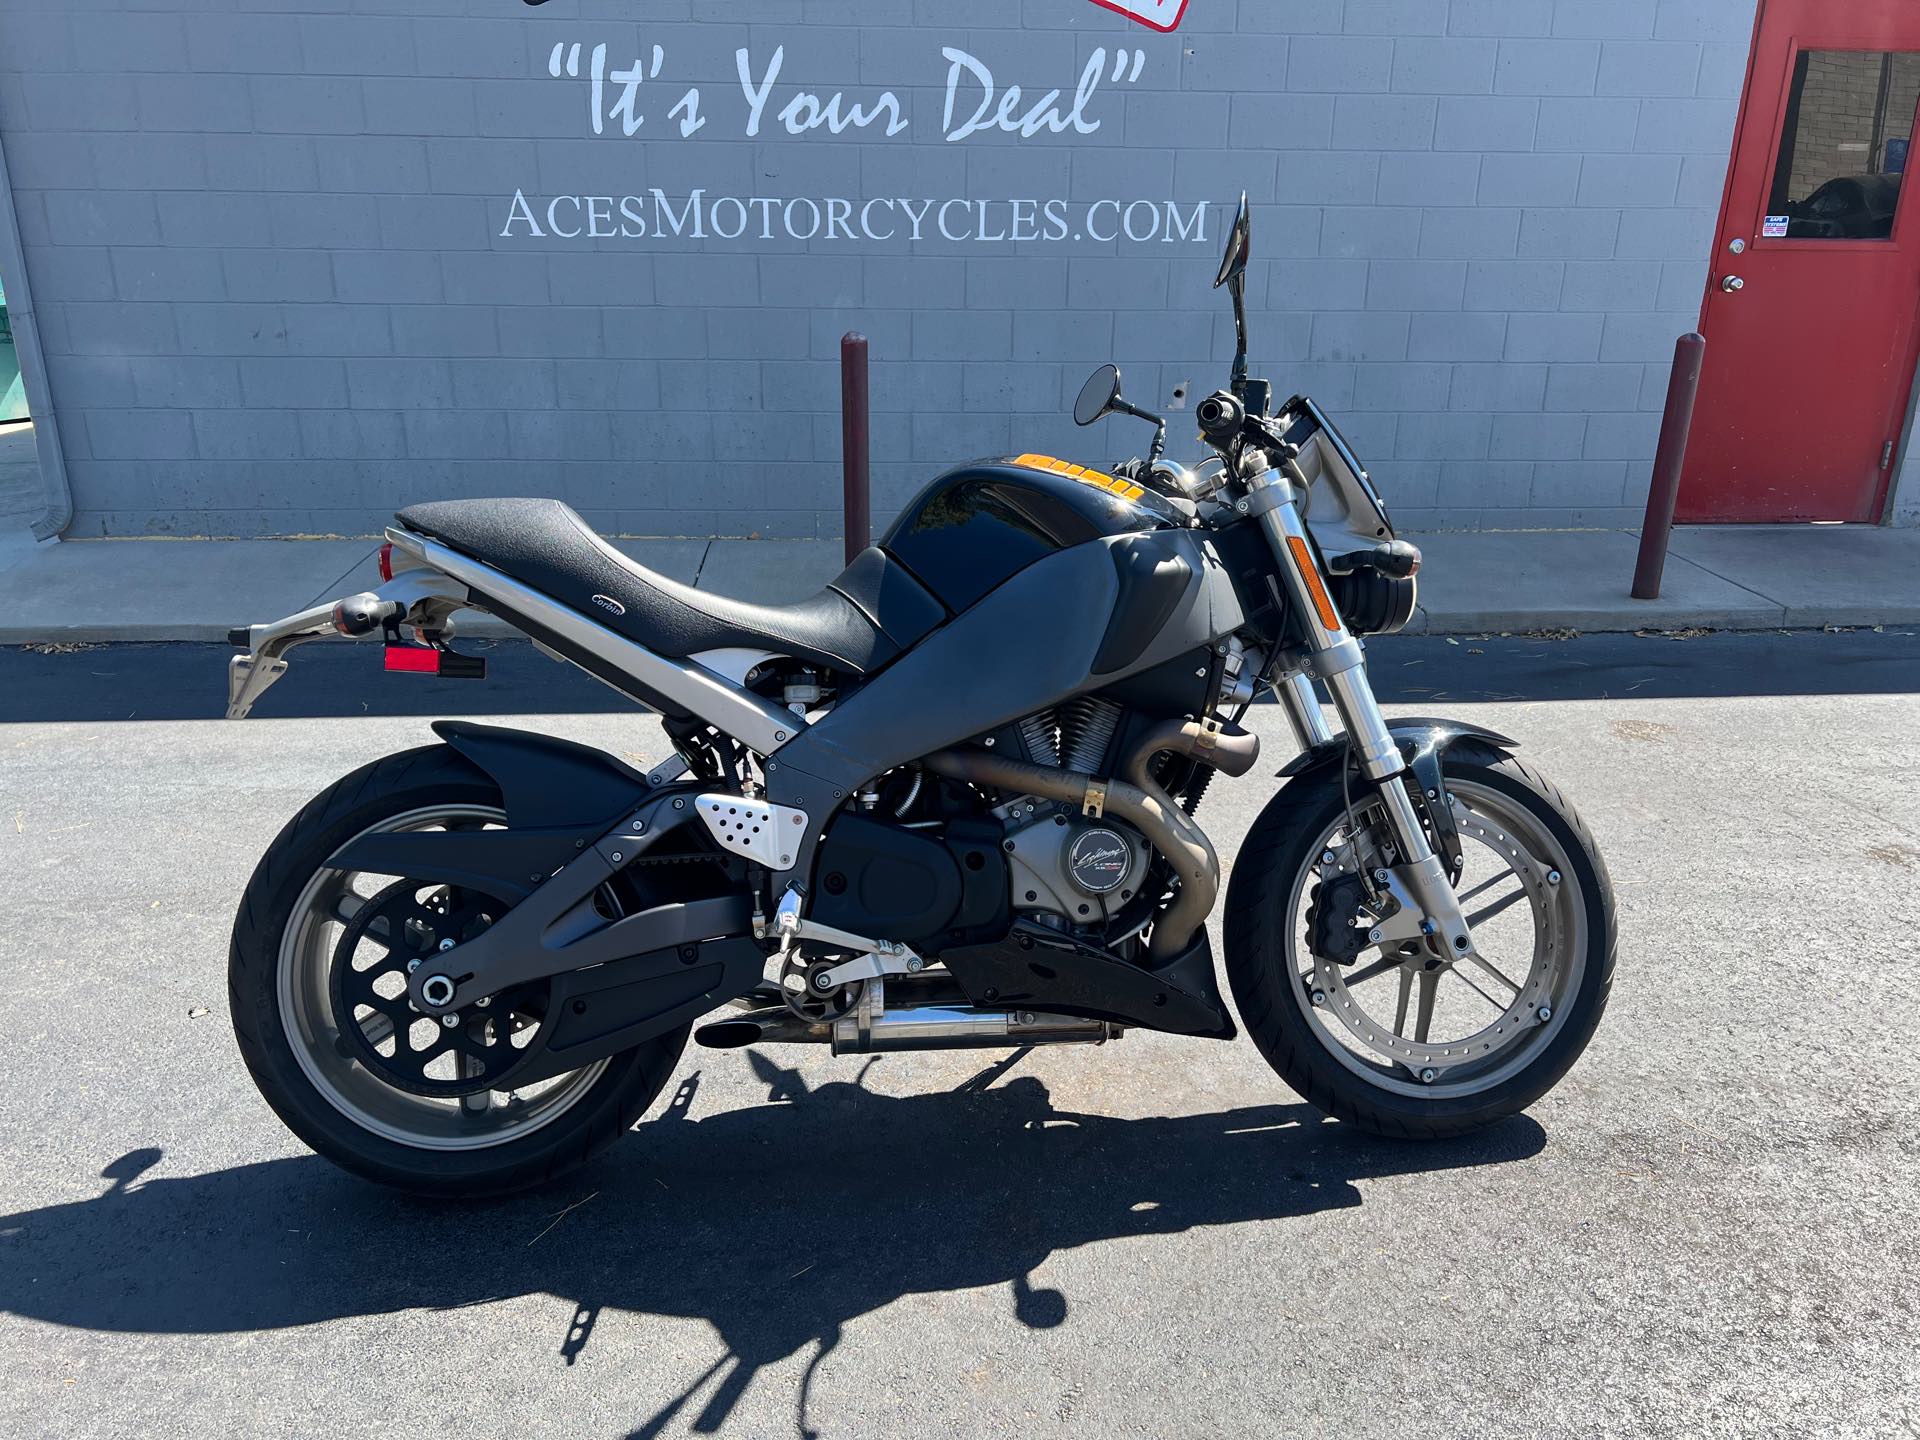 2006 Buell Lightning LONG  XB12Ss at Aces Motorcycles - Fort Collins